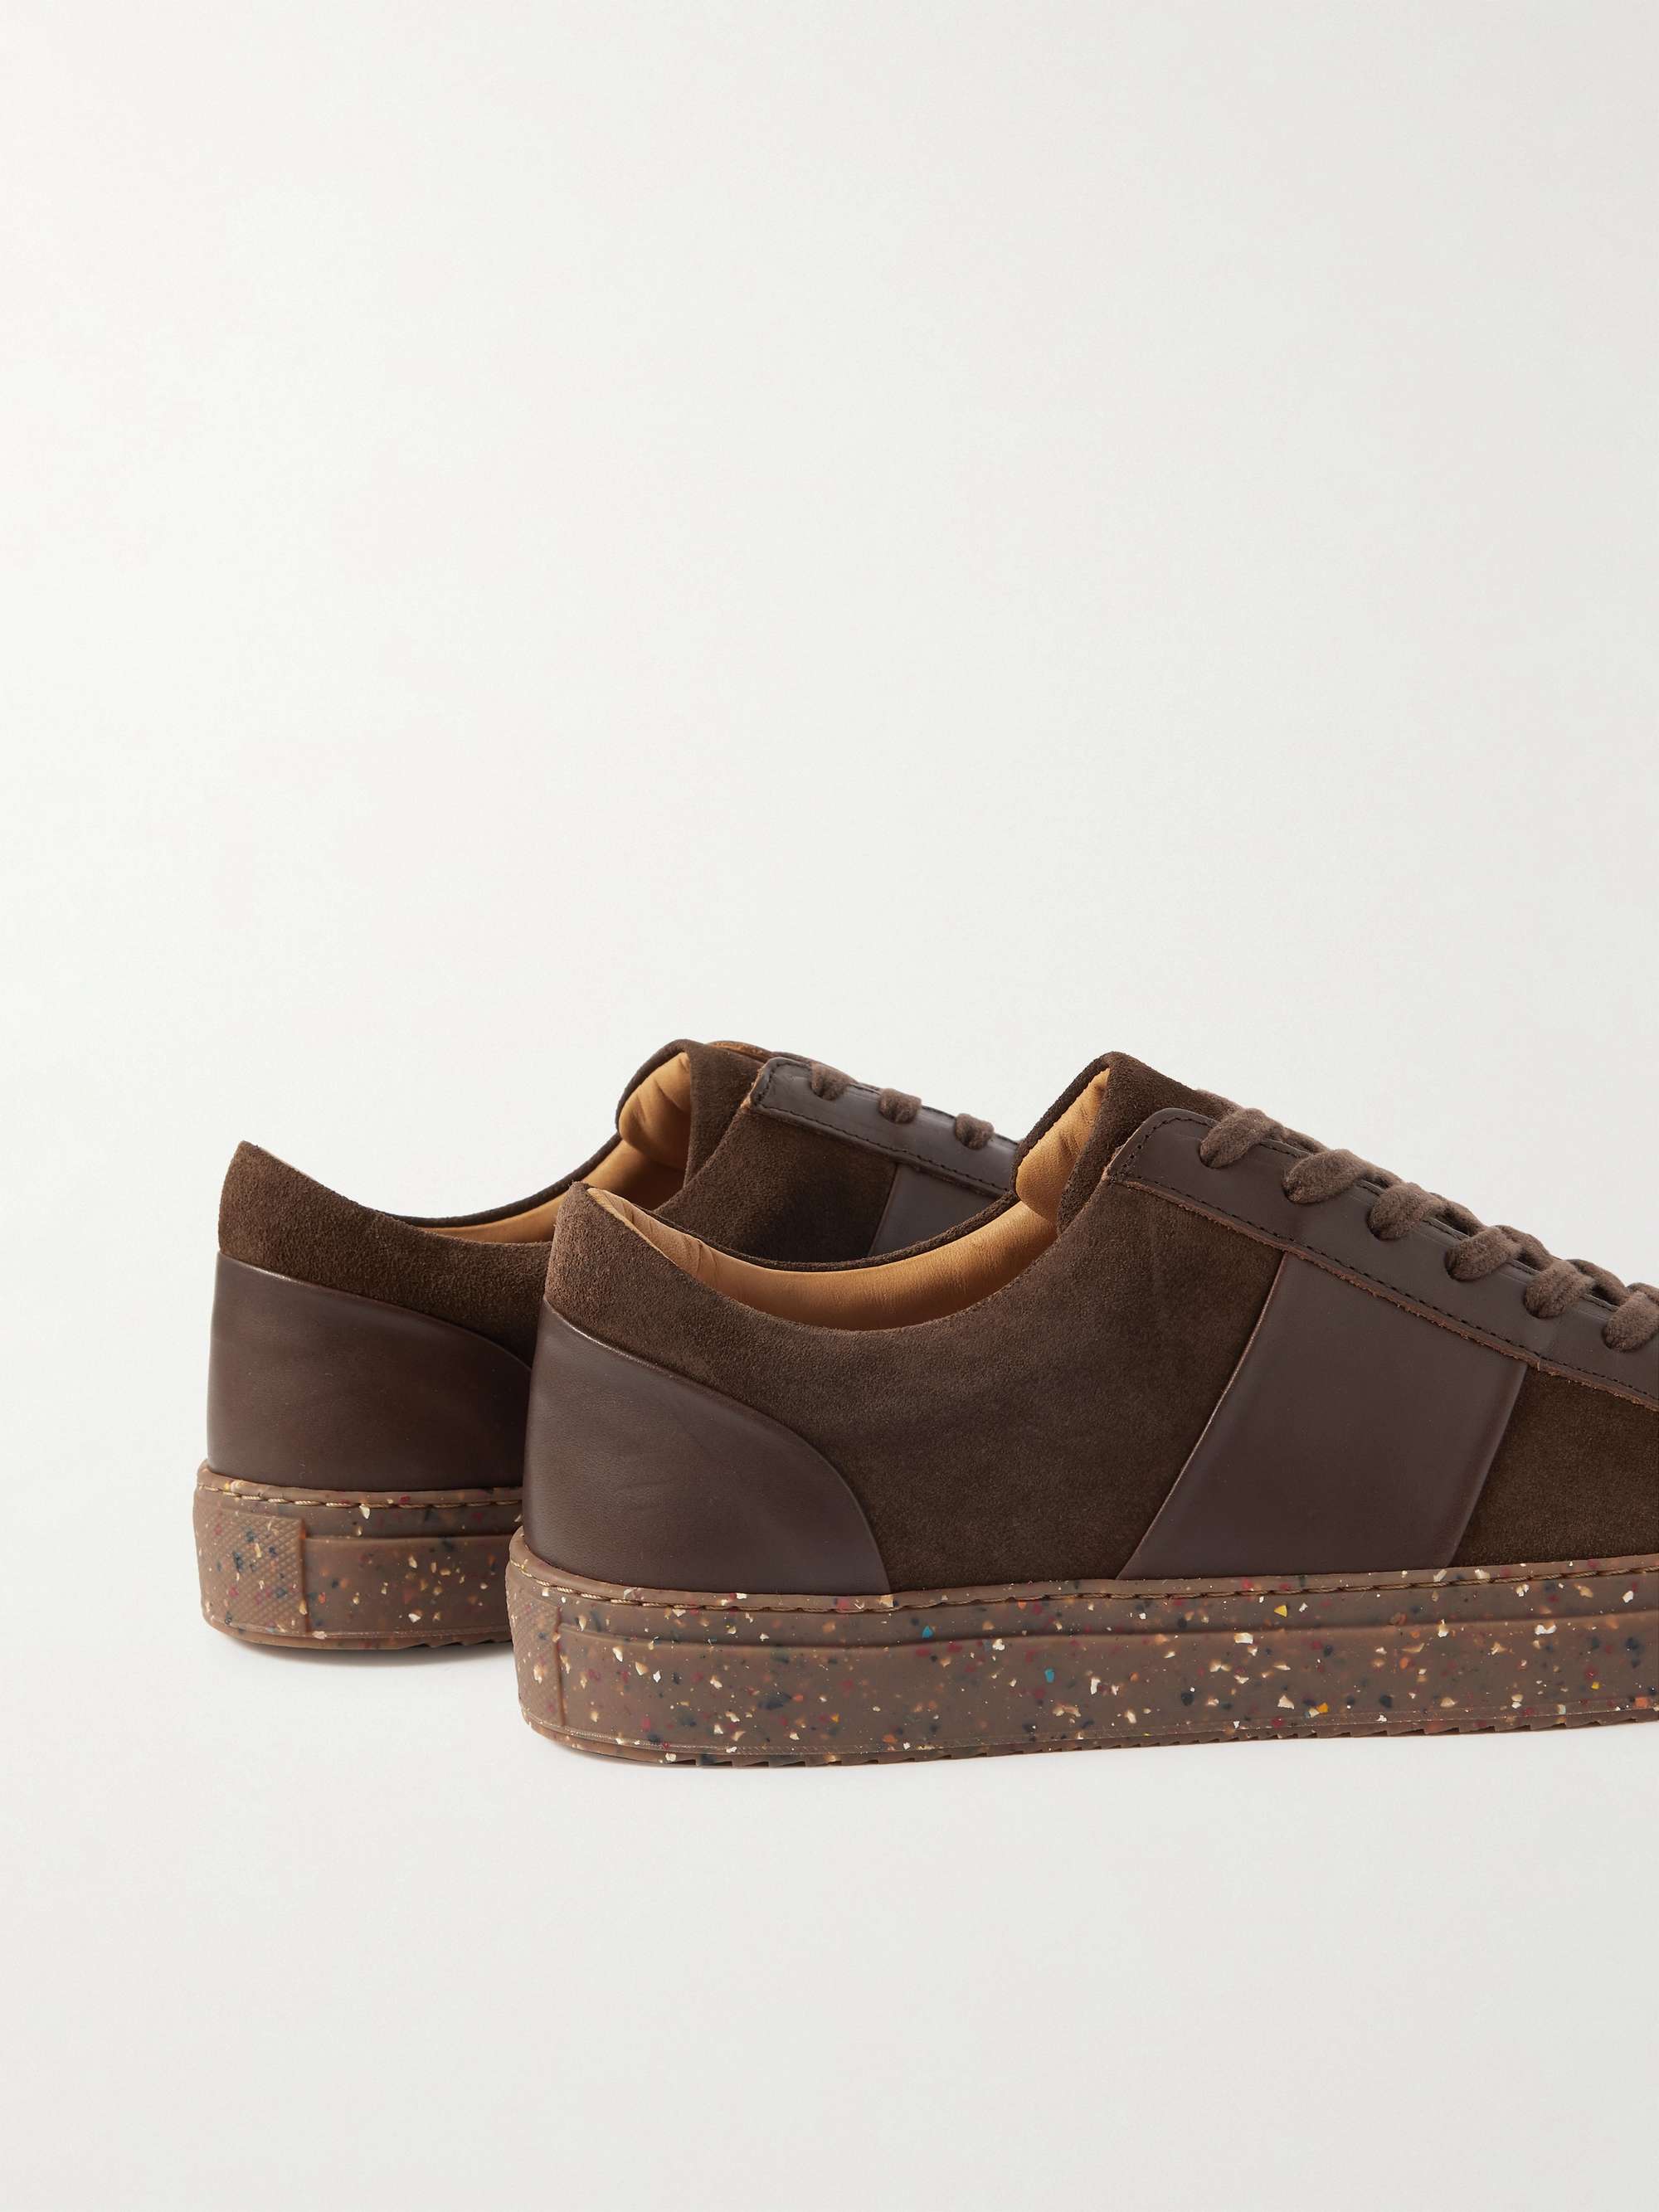 MR P. Larry Leather-Panelled Re-Suede by Evolo Sneakers